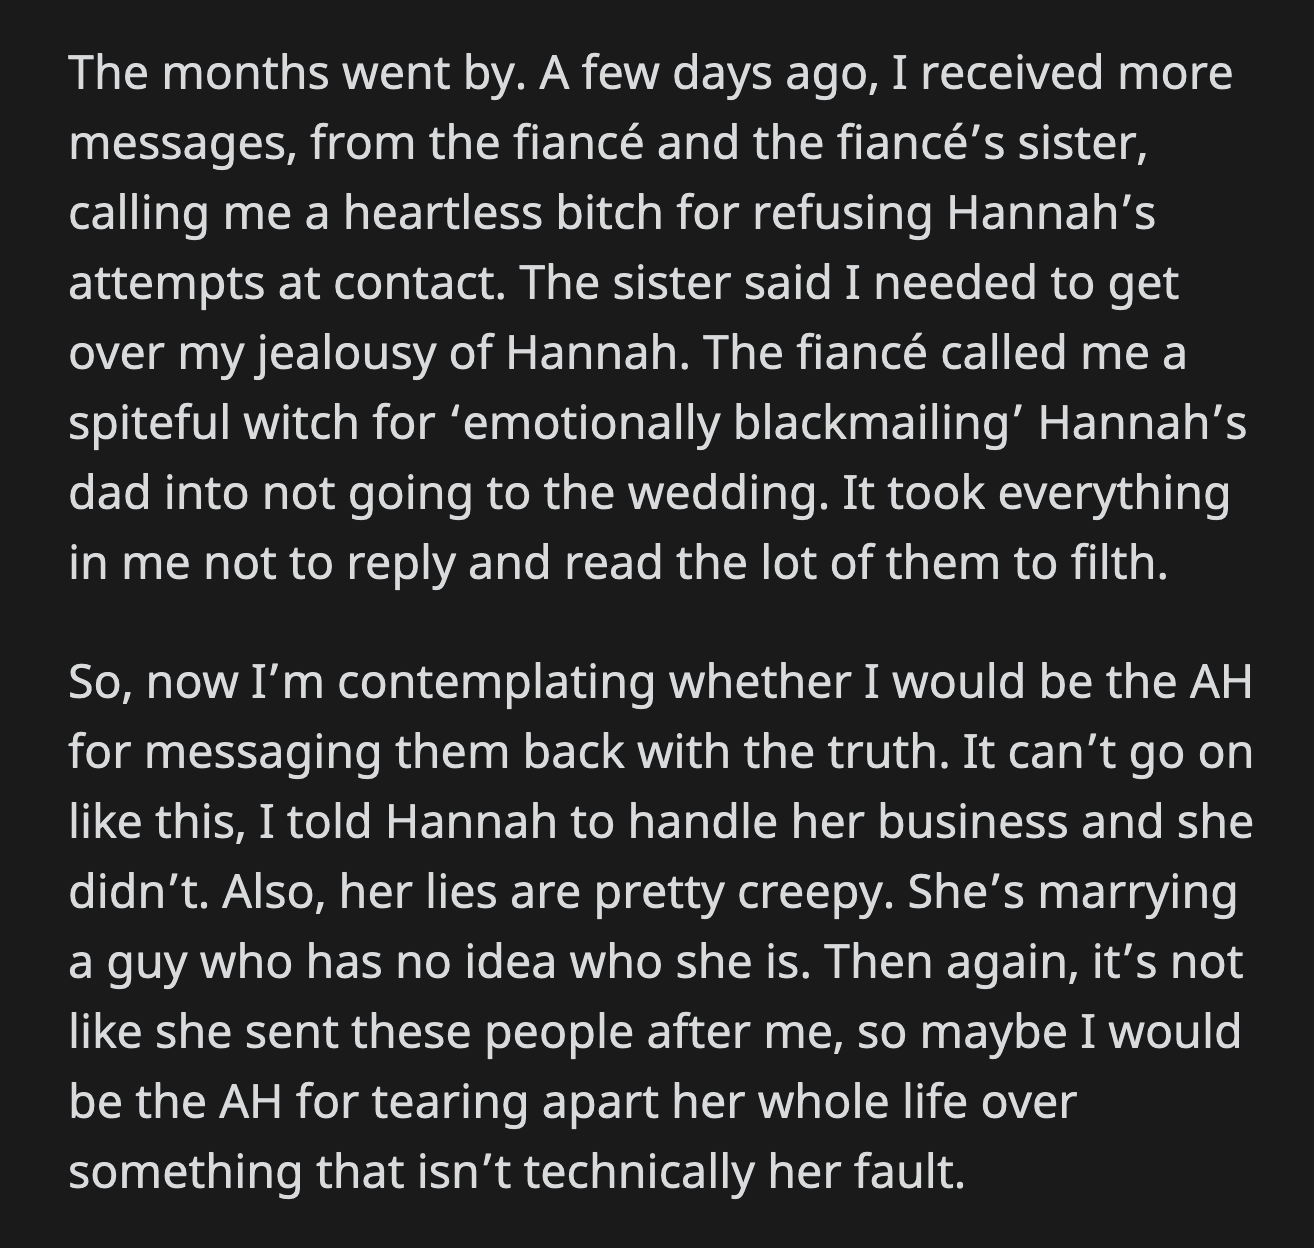 OP got tired of fielding hateful messages from strangers she's never met who are convinced she is a horrible person. Would it be so wrong for OP to be candid with her half-sister's fiancé?